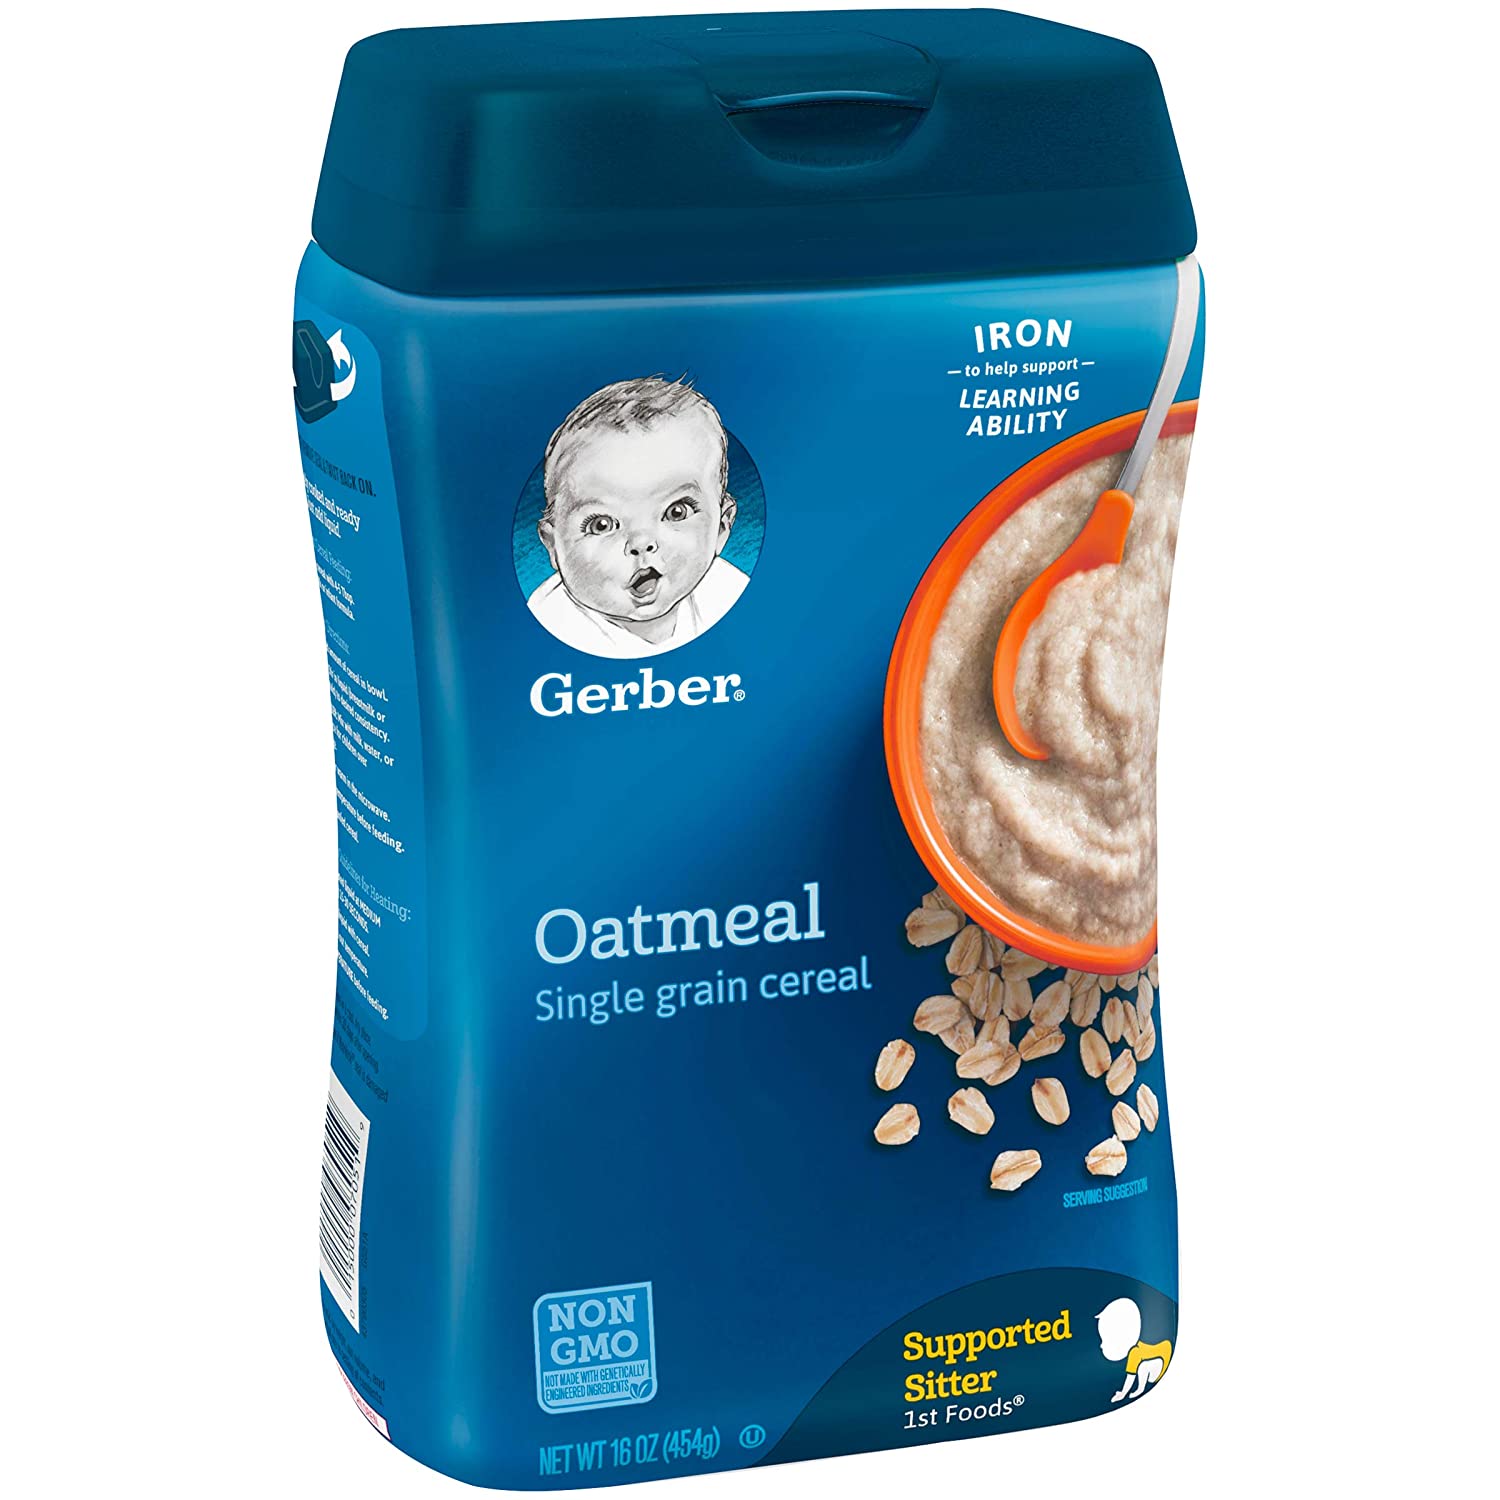 6-Pack of Gerber Single-Grain Oatmeal Baby Cereal (16 Ounce Each) for